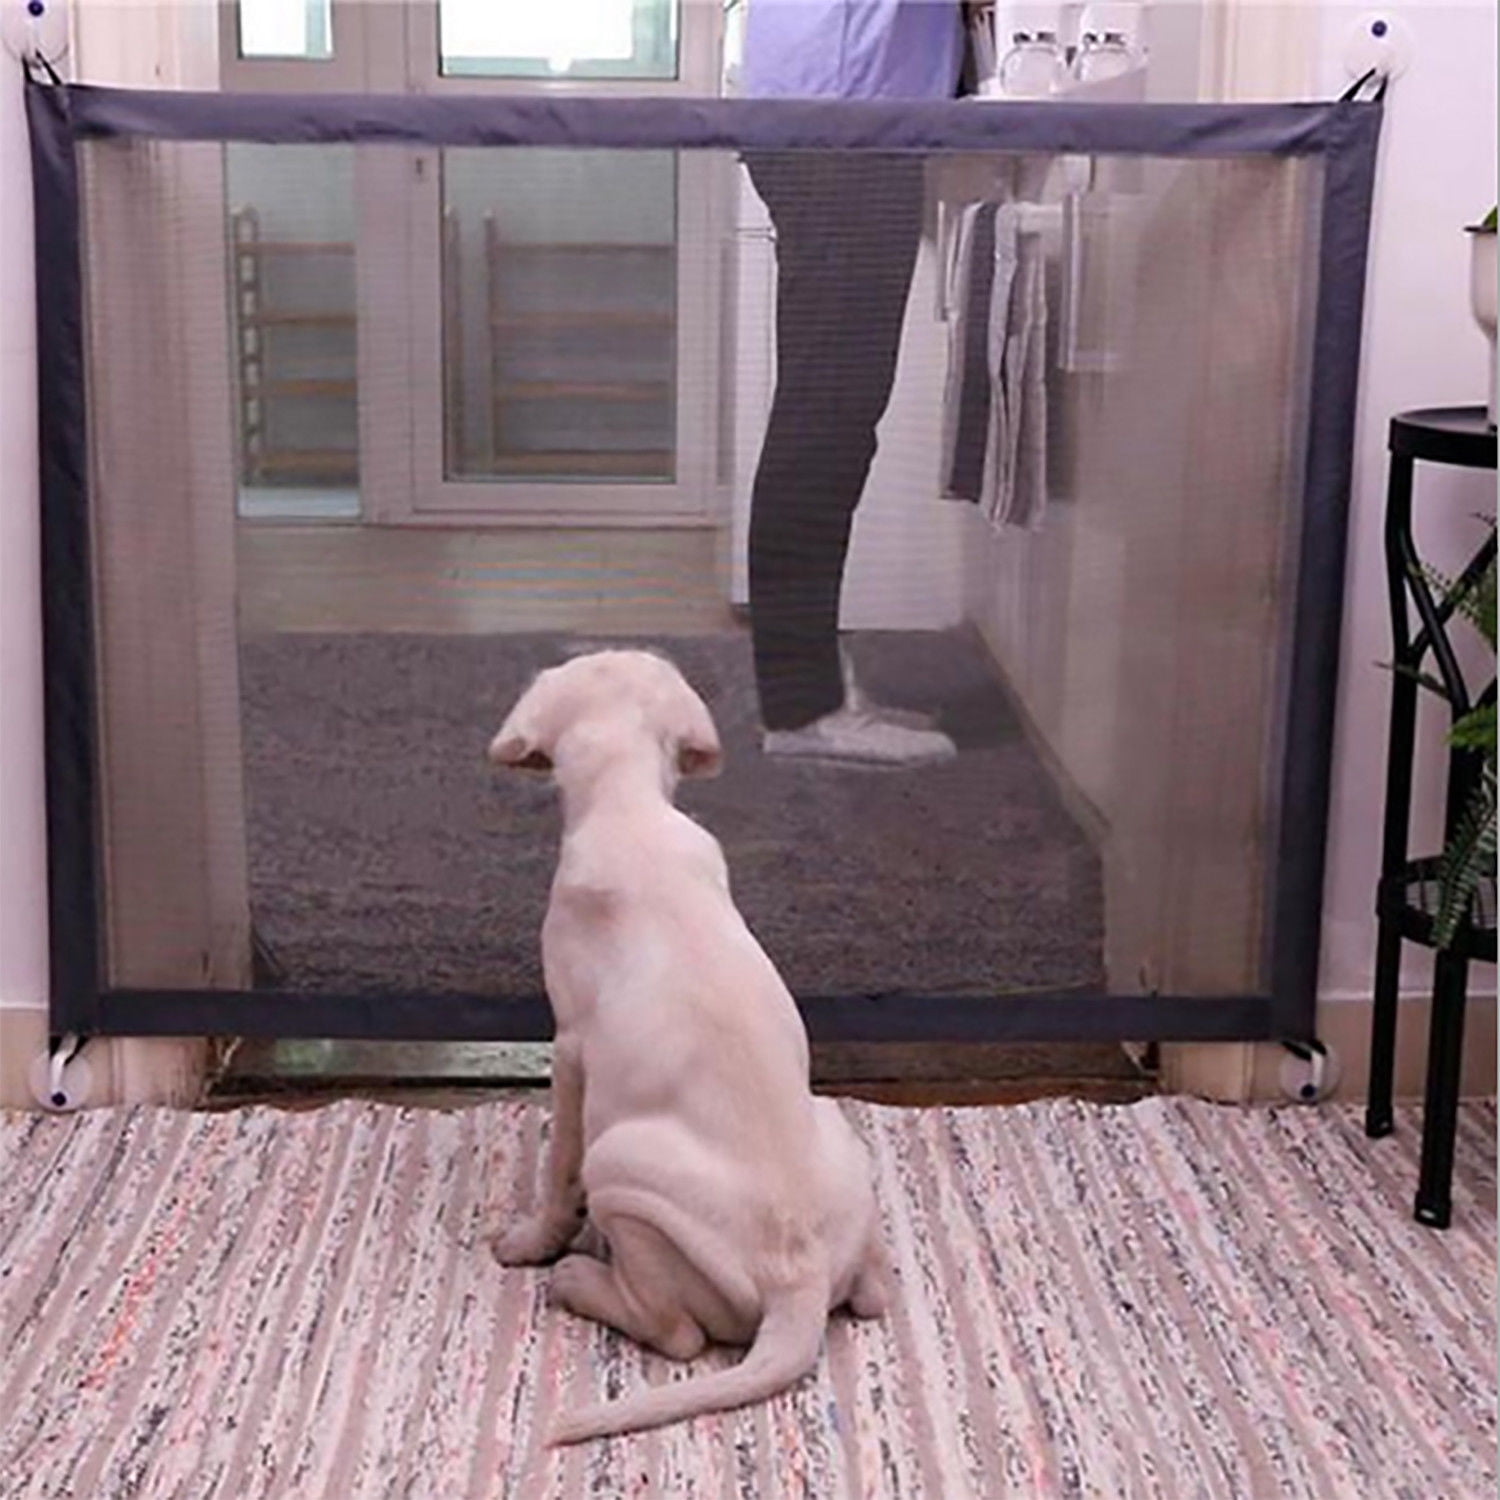 Mesh Magic Pet Dog Gate Safe Guard And Install Anywhere Pets Safety Enclosure US 